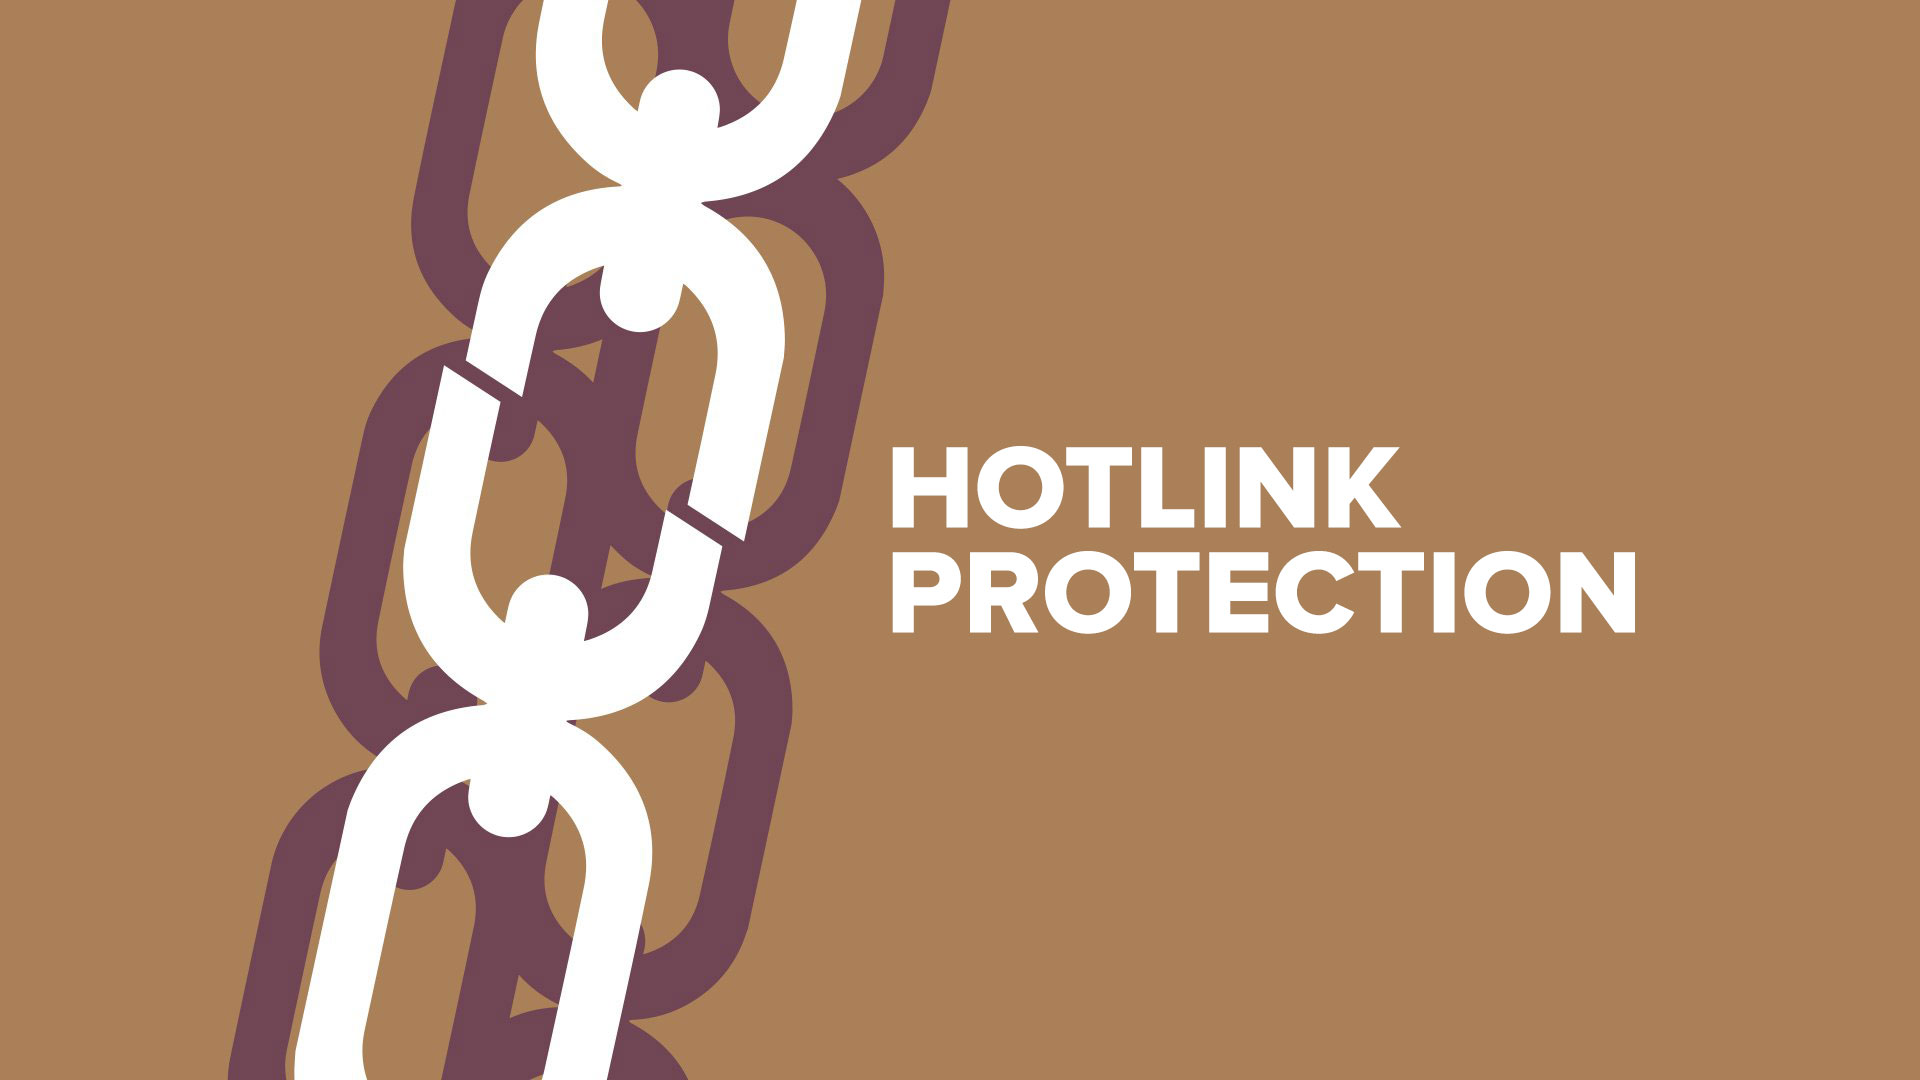 Hotlink Protection